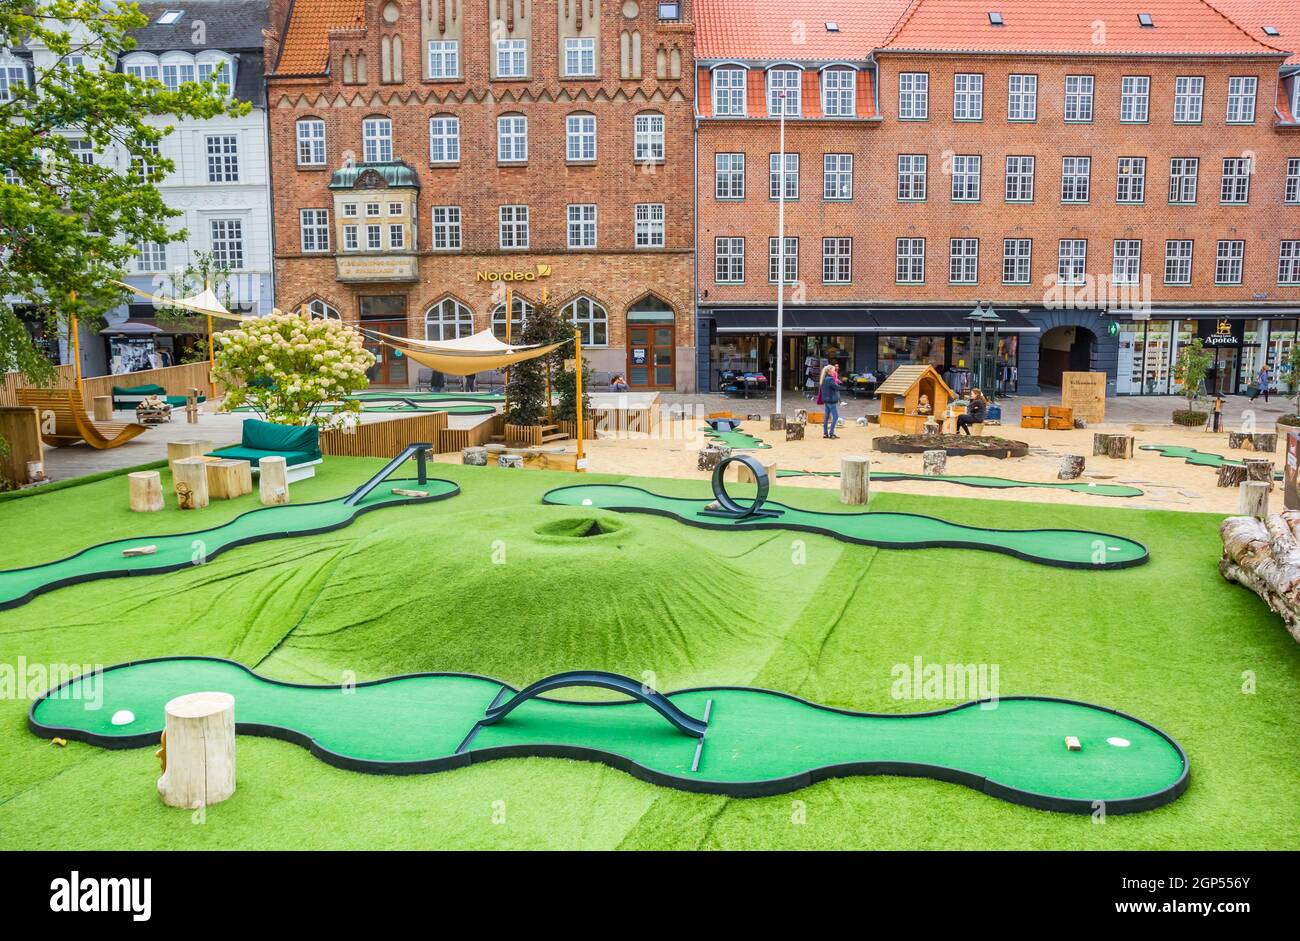 Miniature golf course on the central market square of Viborg, Denmark Stock Photo